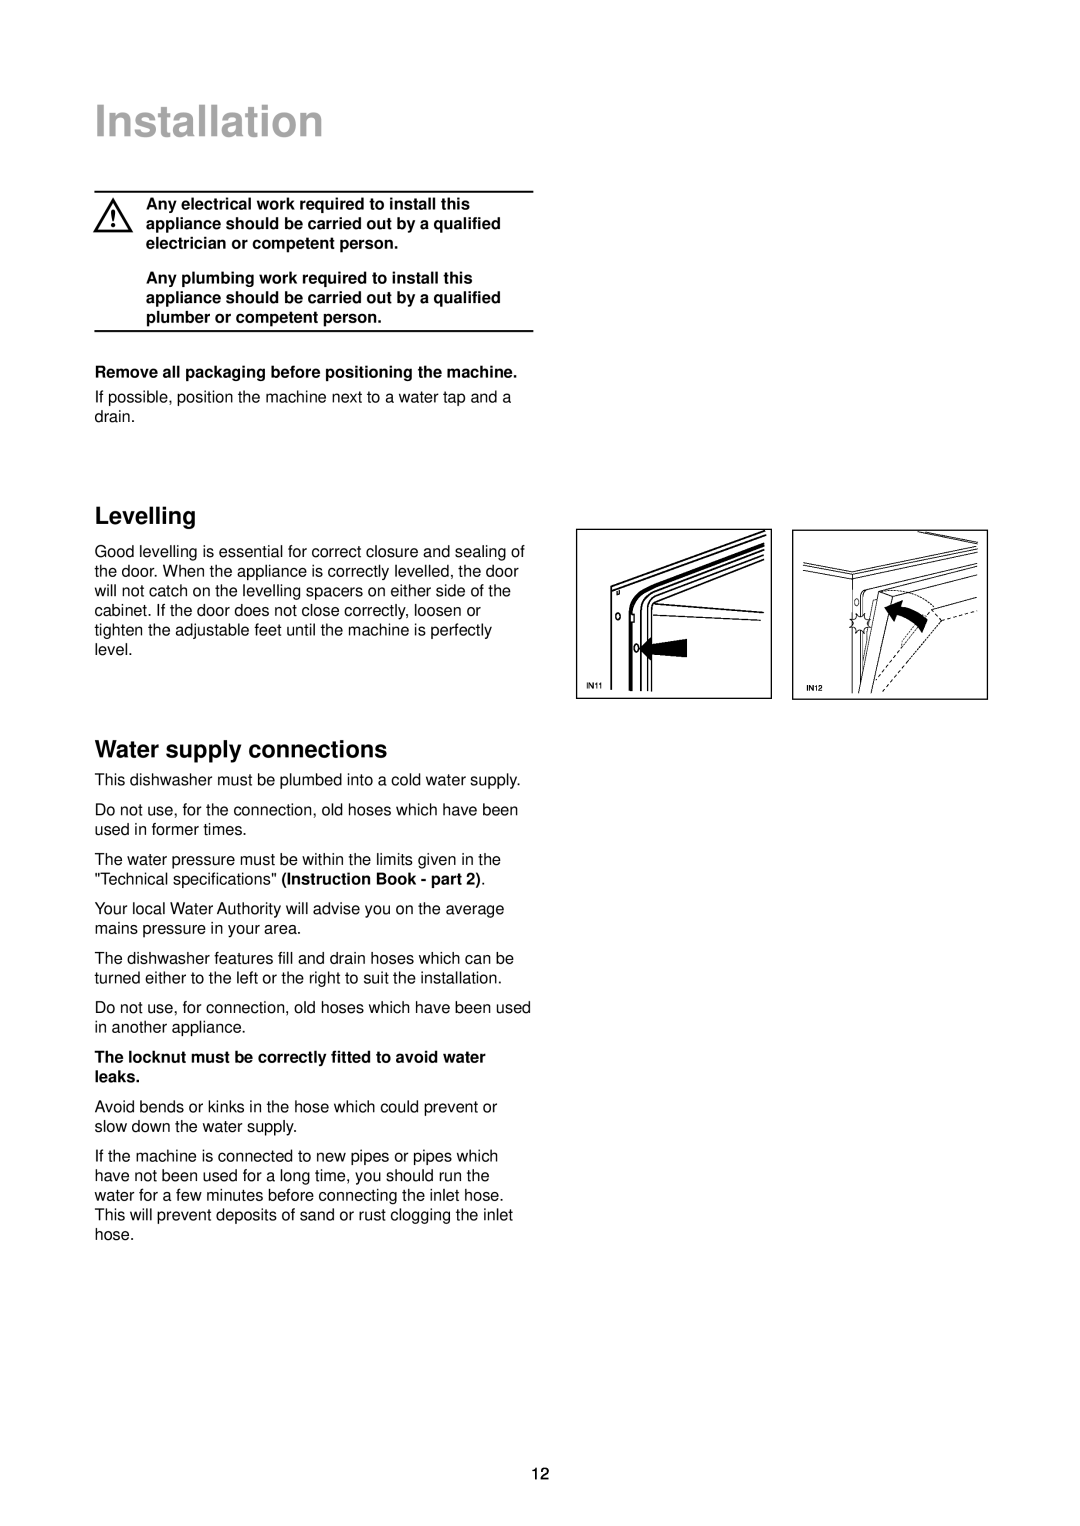 Zanussi DA 4342 Installation, Levelling, Water supply connections, Remove all packaging before positioning the machine 